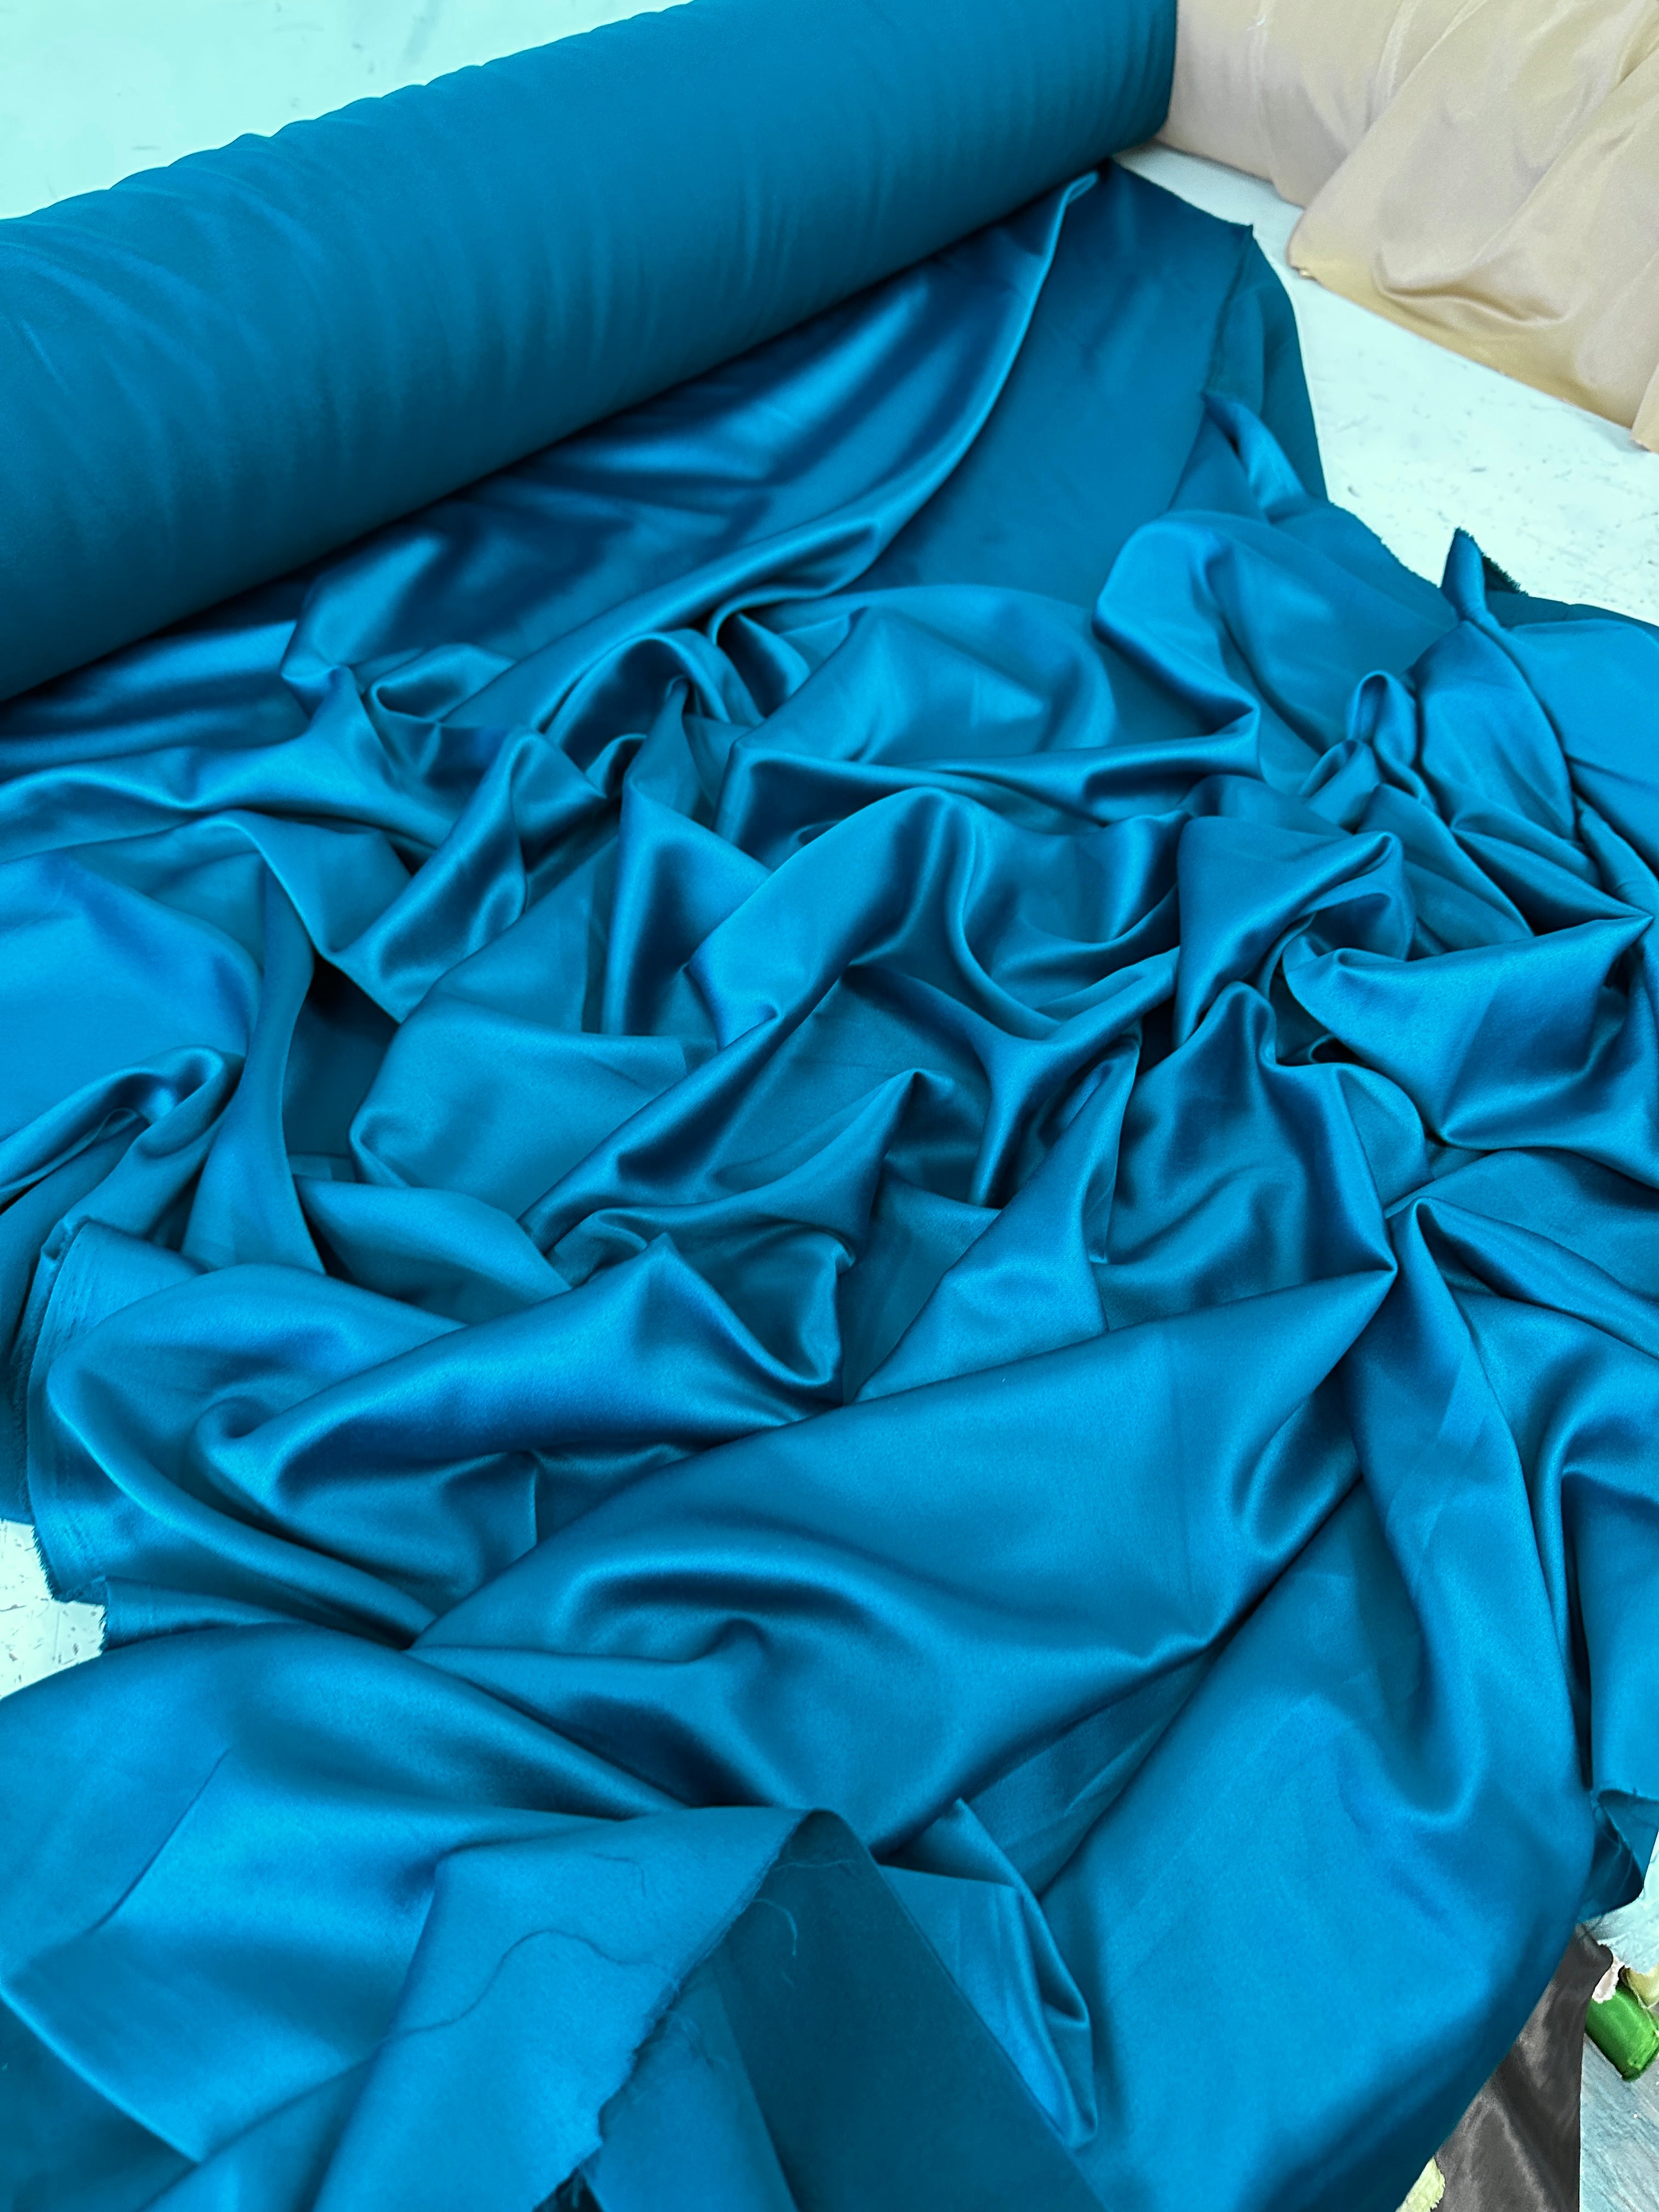 teal blue stretch crepe back satin, blue stretch crepe back satin, dark blue stretch crepe back satin, premium stretch crepe back satin, satin for bride, satin for woman, satin in low price, cheap satin, satin on sale